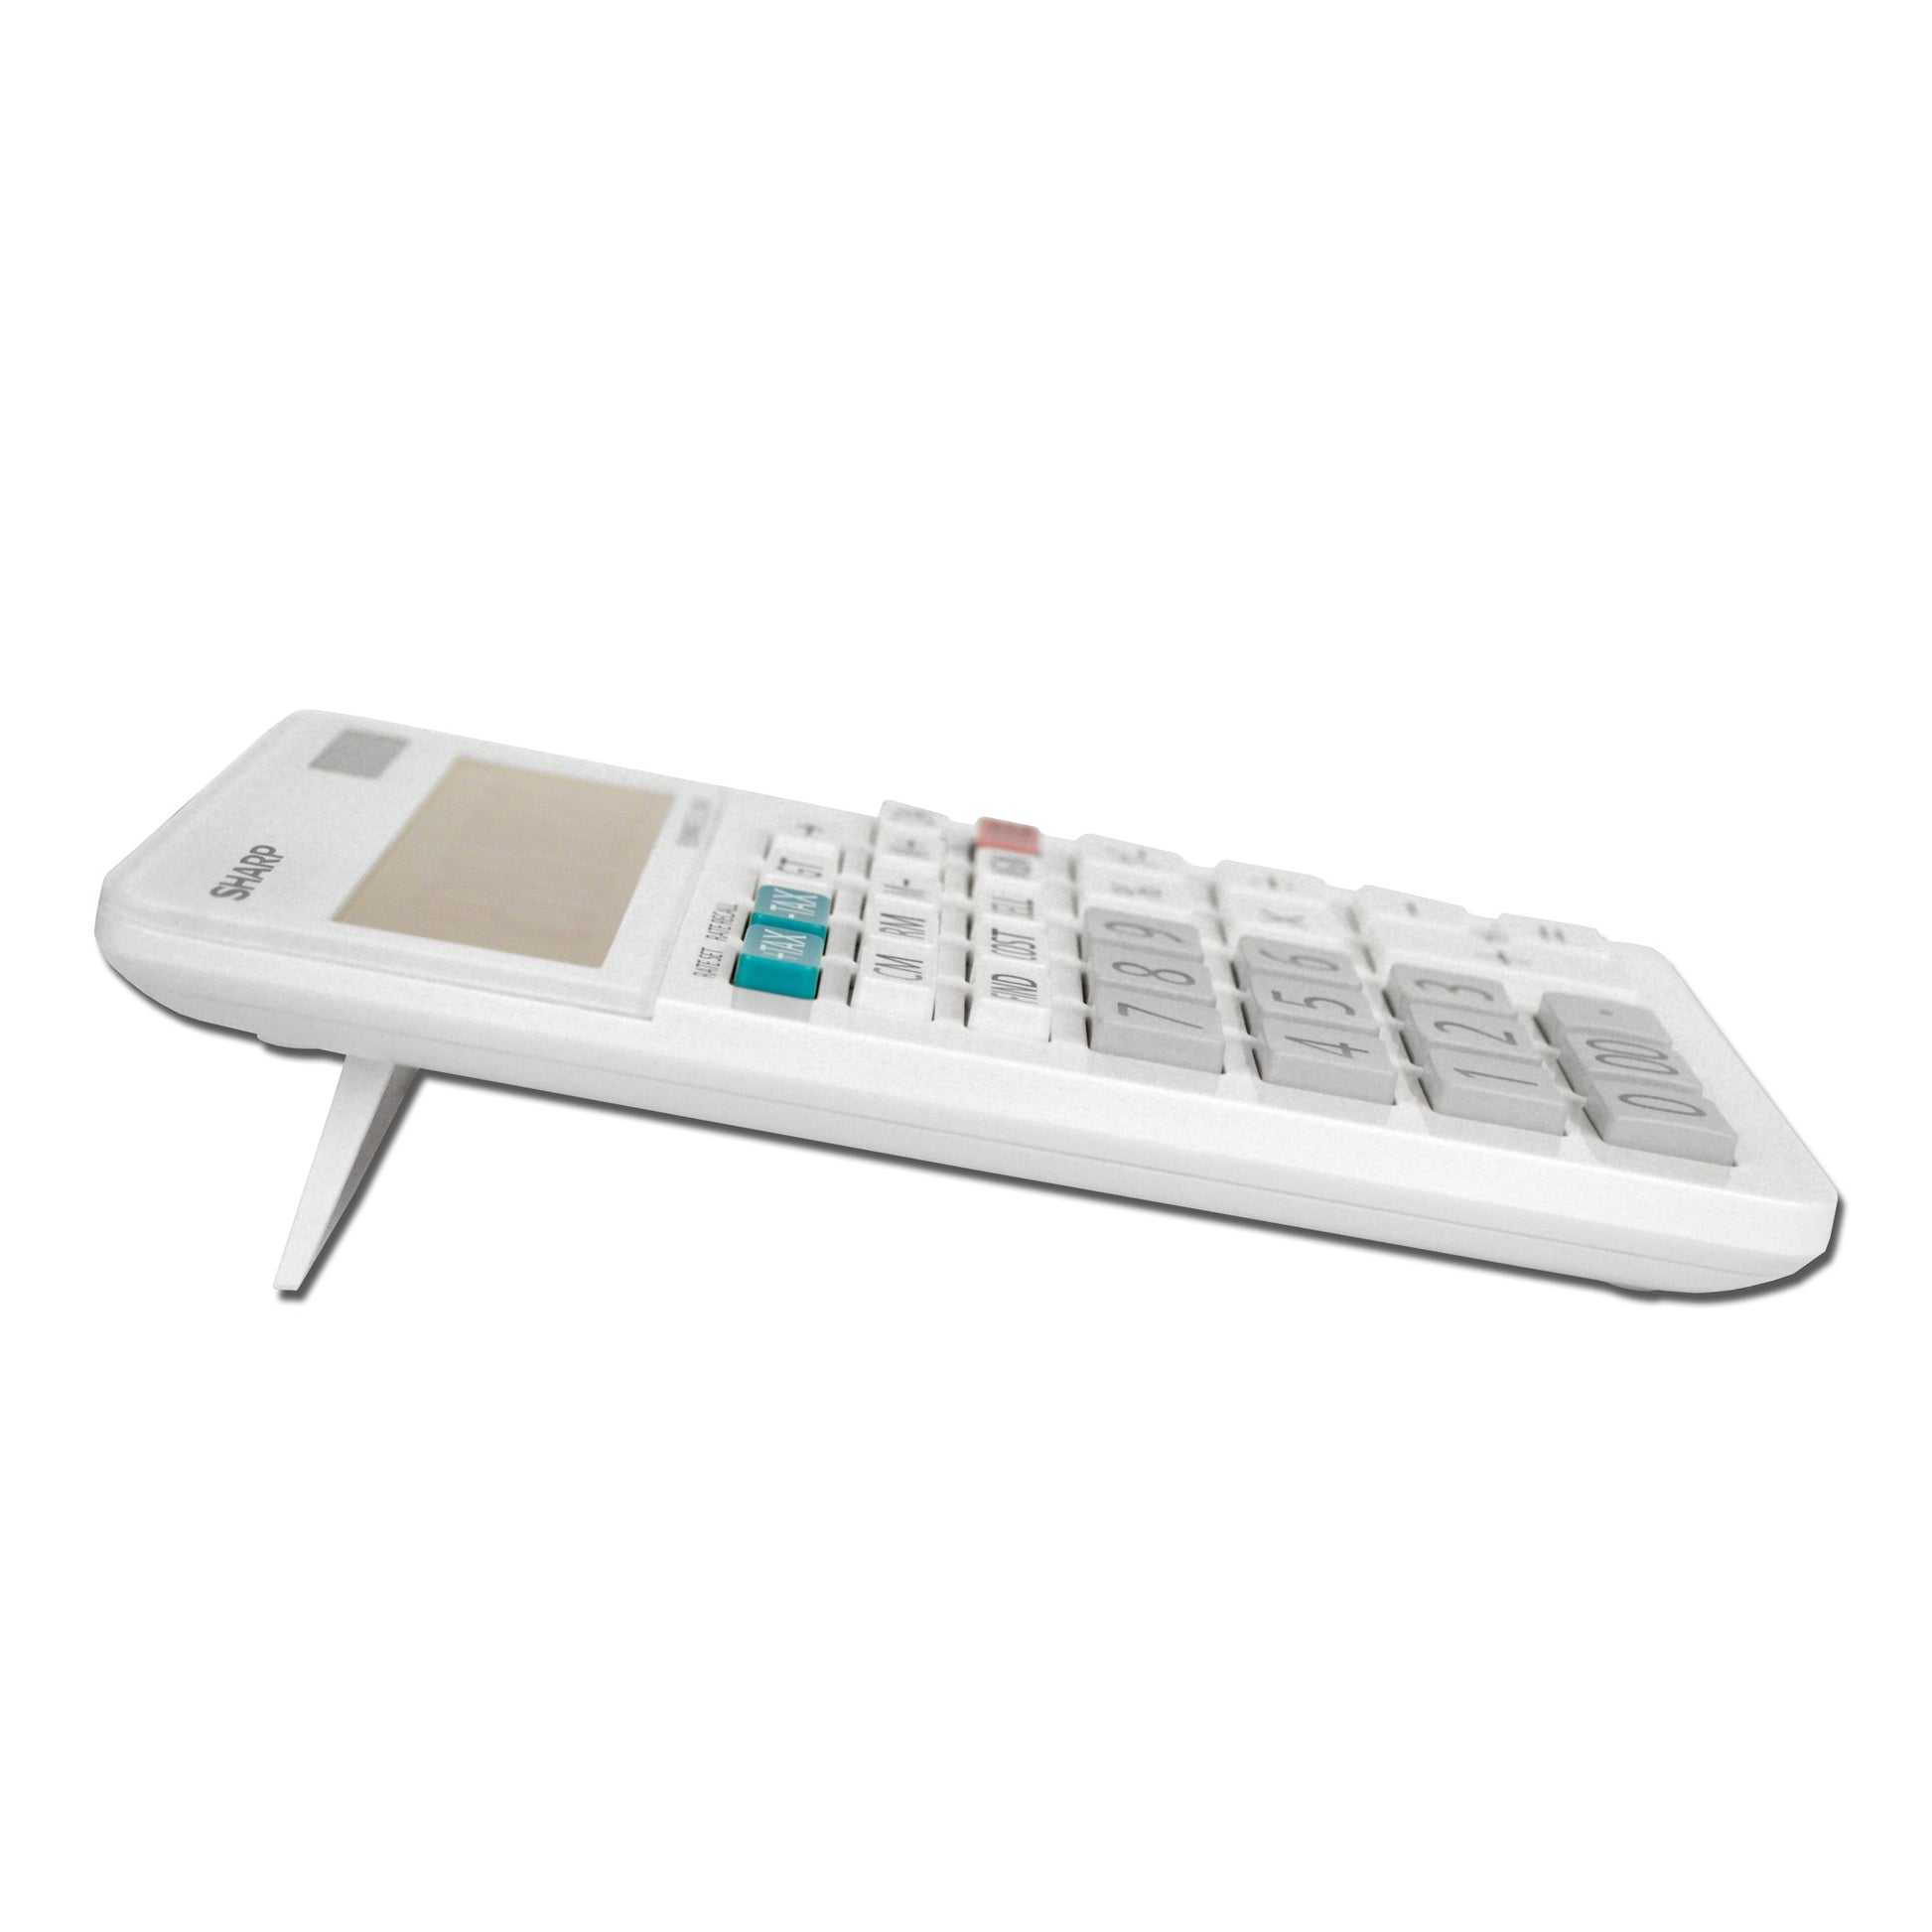 extra large white desktop calculator with kickstand